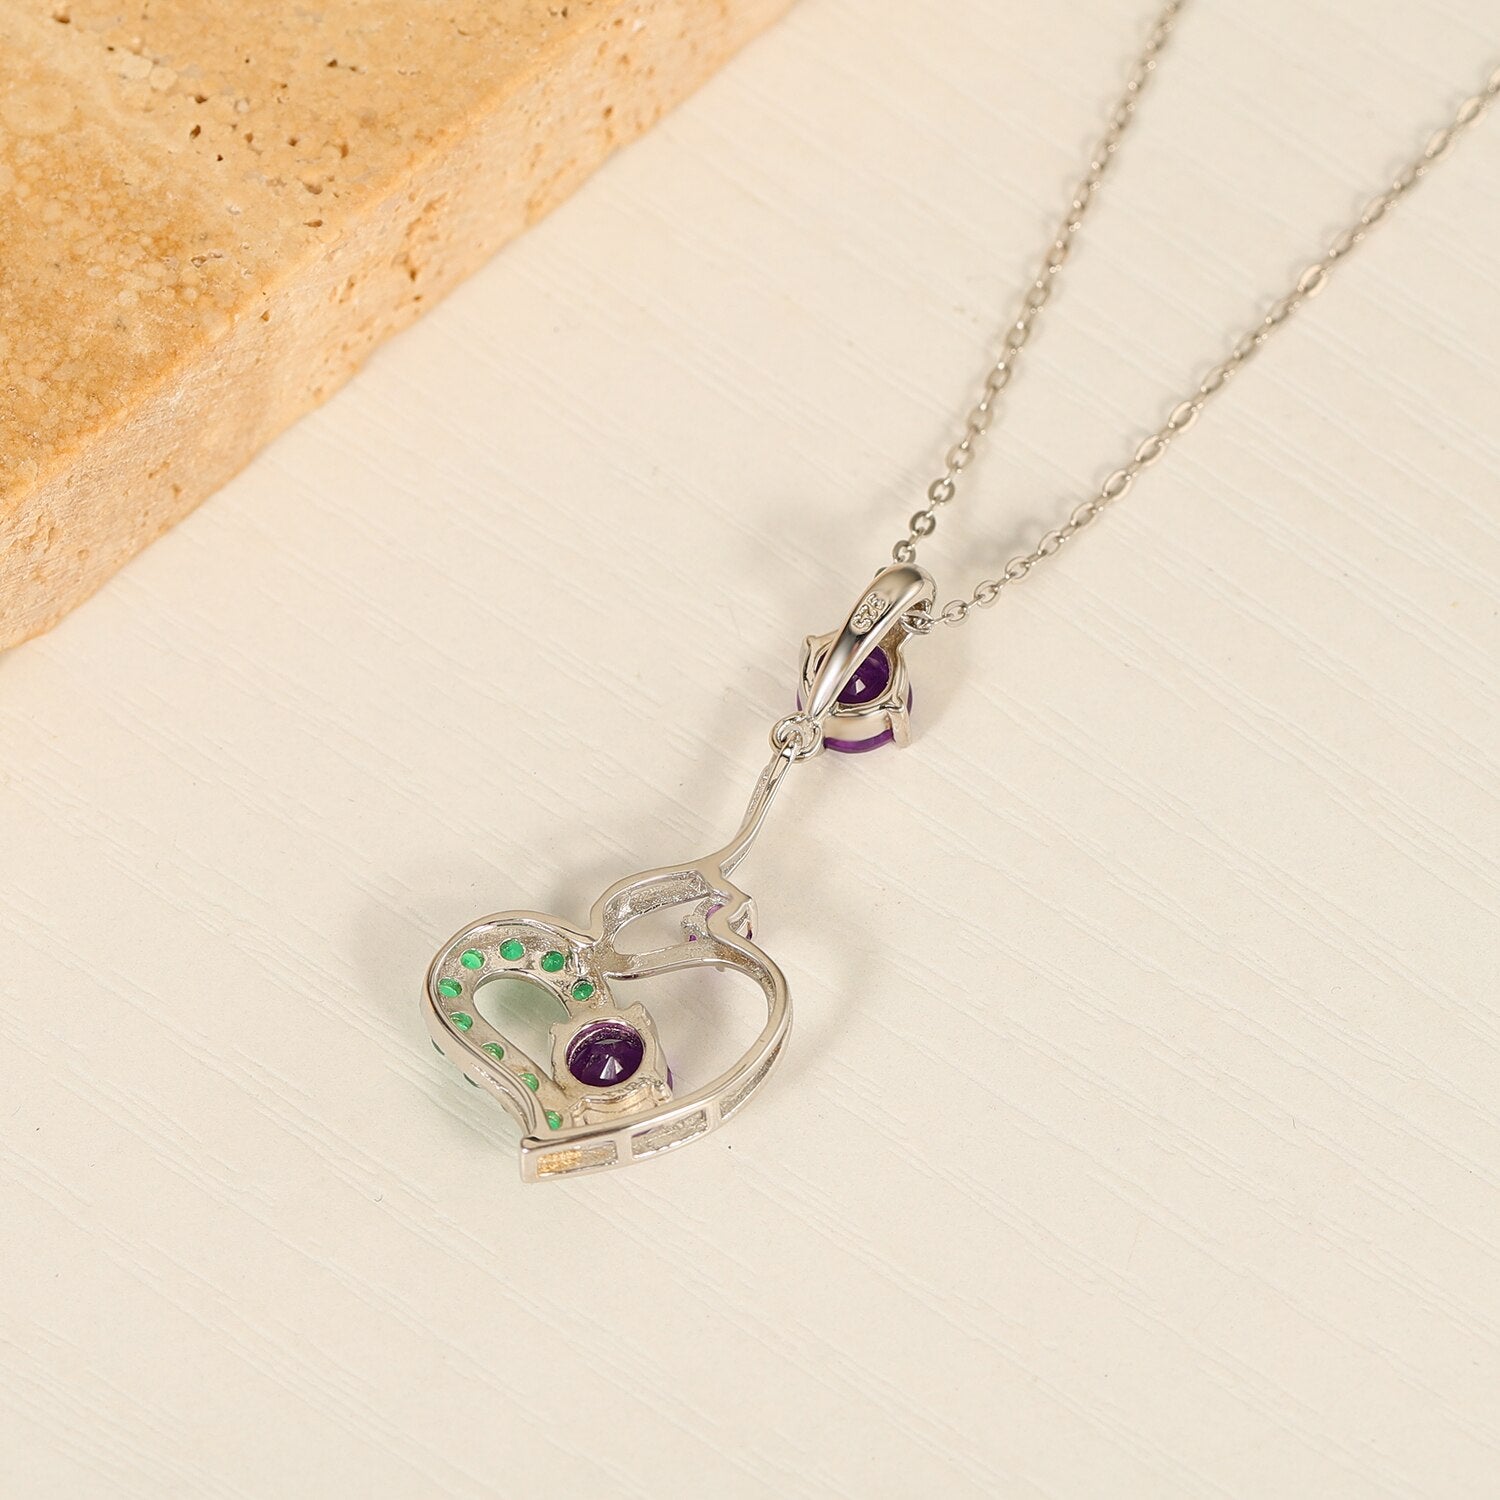 GEM&#39;S BALLET Cherry Shape Fruit Statement Necklace Amethyst Gemstone Pendant Necklace in 925 Sterling Silver Gift For Her